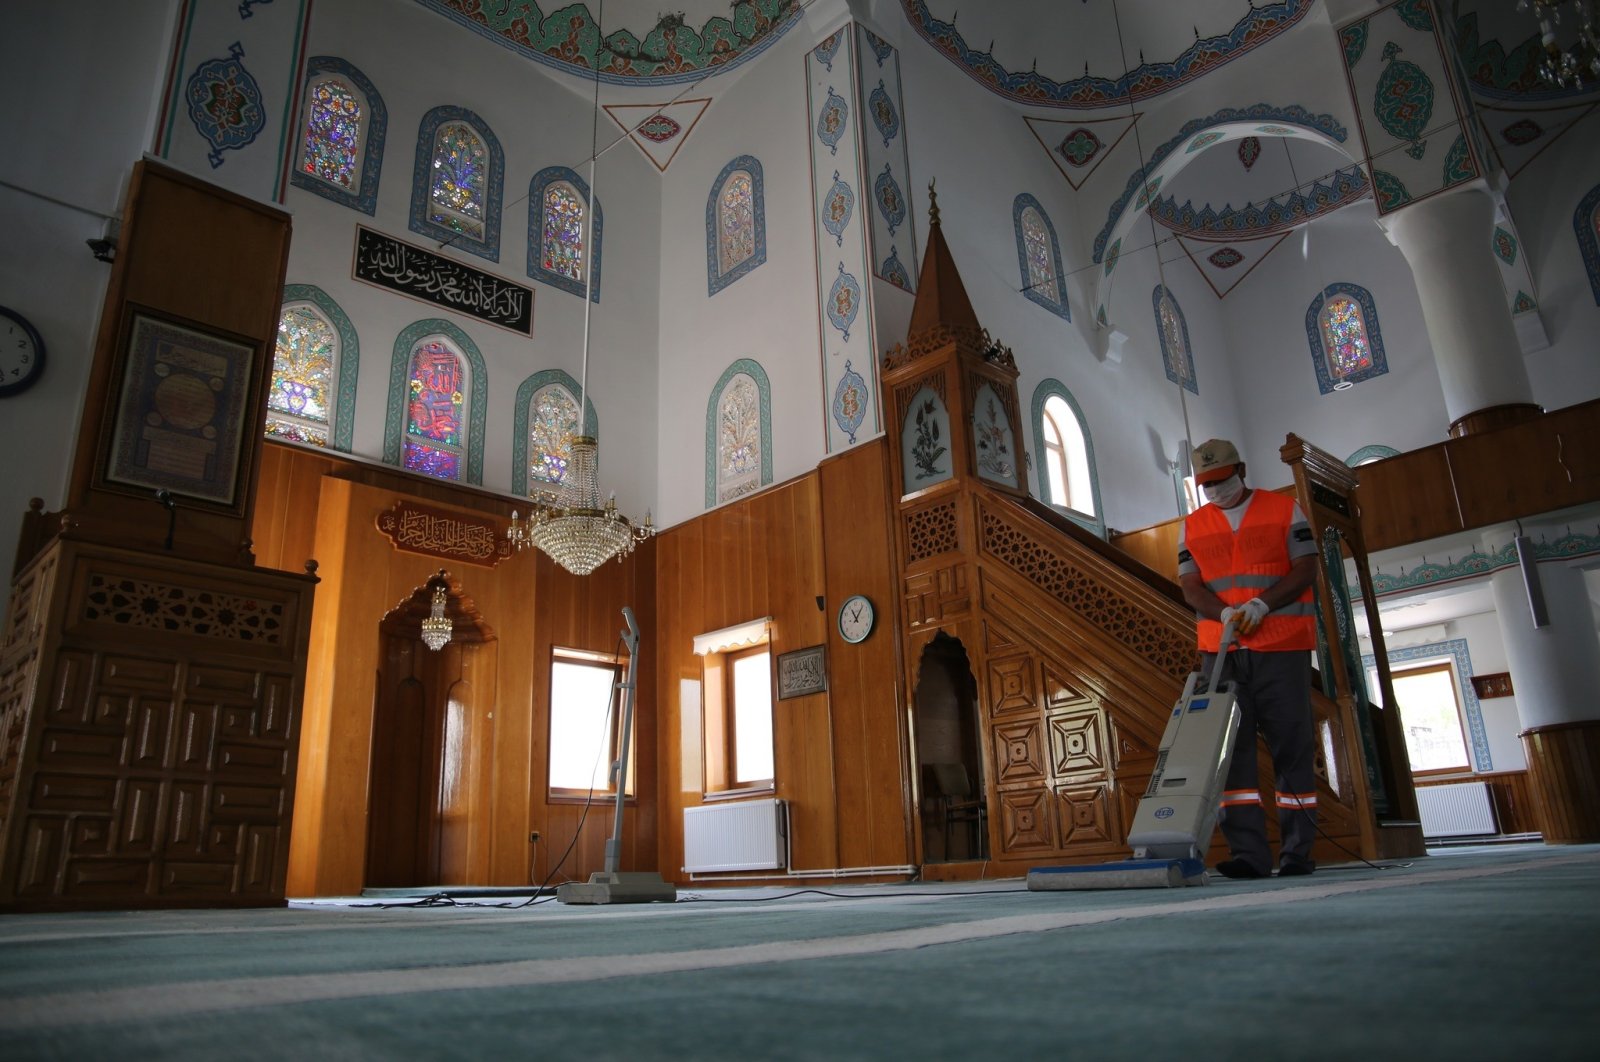 A worker cleans a mosque in preparation for Ramadan, in Sivas, central Turkey, March 27, 2022. (İHA PHOTO)